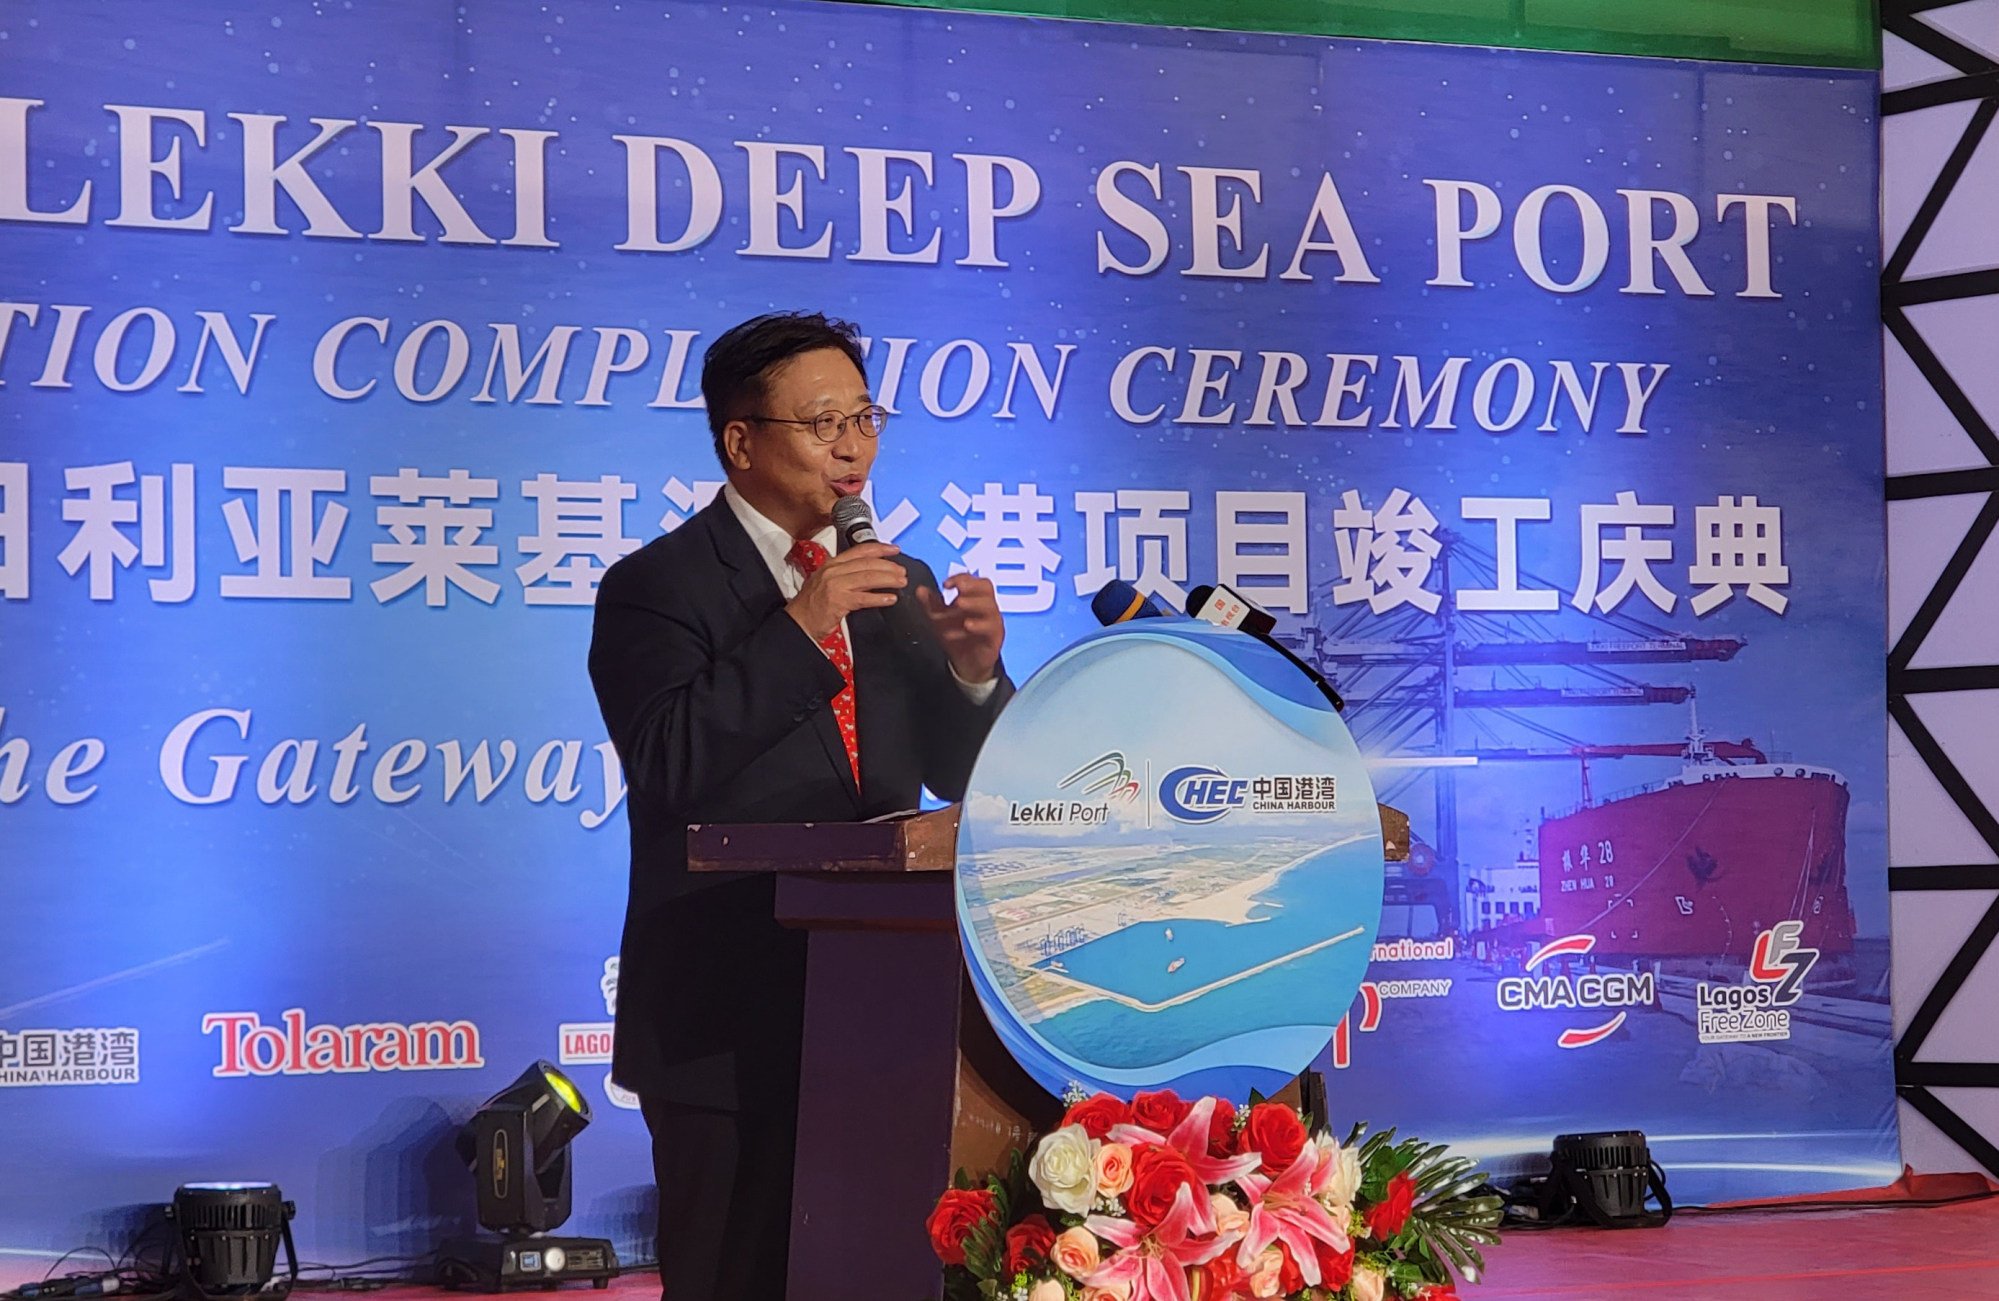 China’s ambassador to Nigeria, Cui Jianchun, told an event on Monday marking the completion of construction work on the Lekki Deep Sea Port in Lagos state that it will help Nigerian commodities reach international markets. Photo: Xinhua